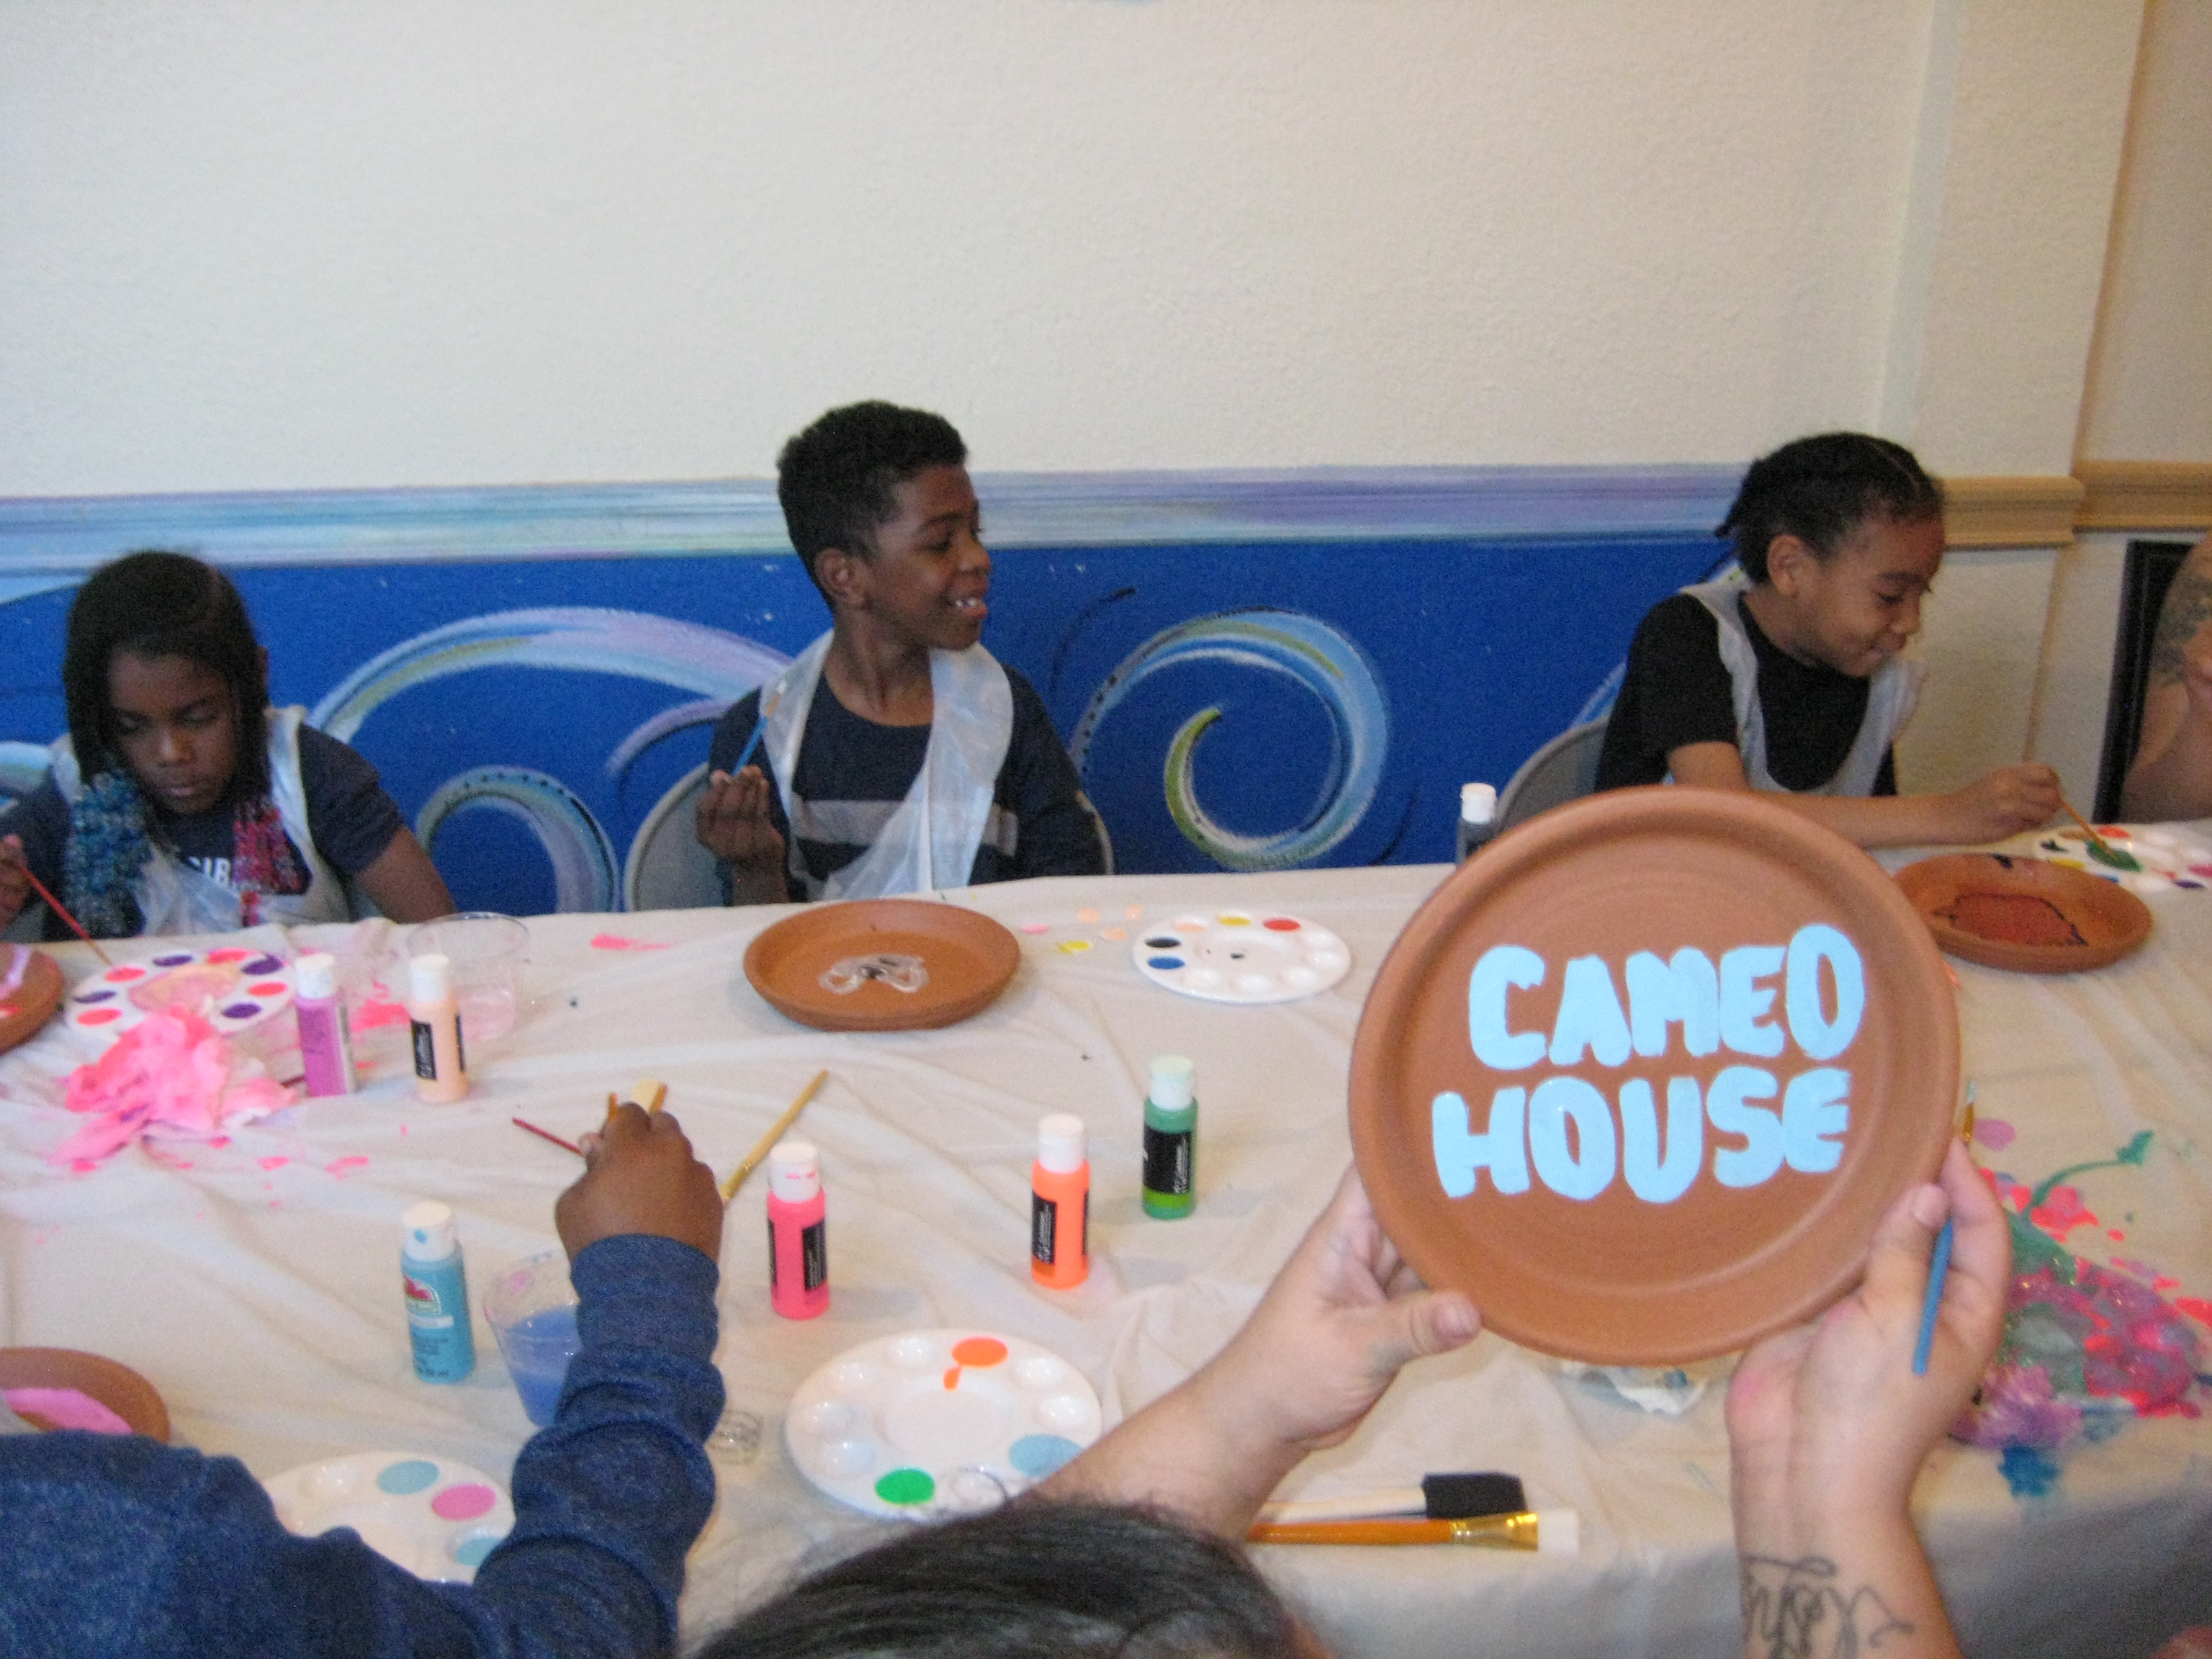 Cameo House families enjoy painting ceramic pots together as part of a beautification project.